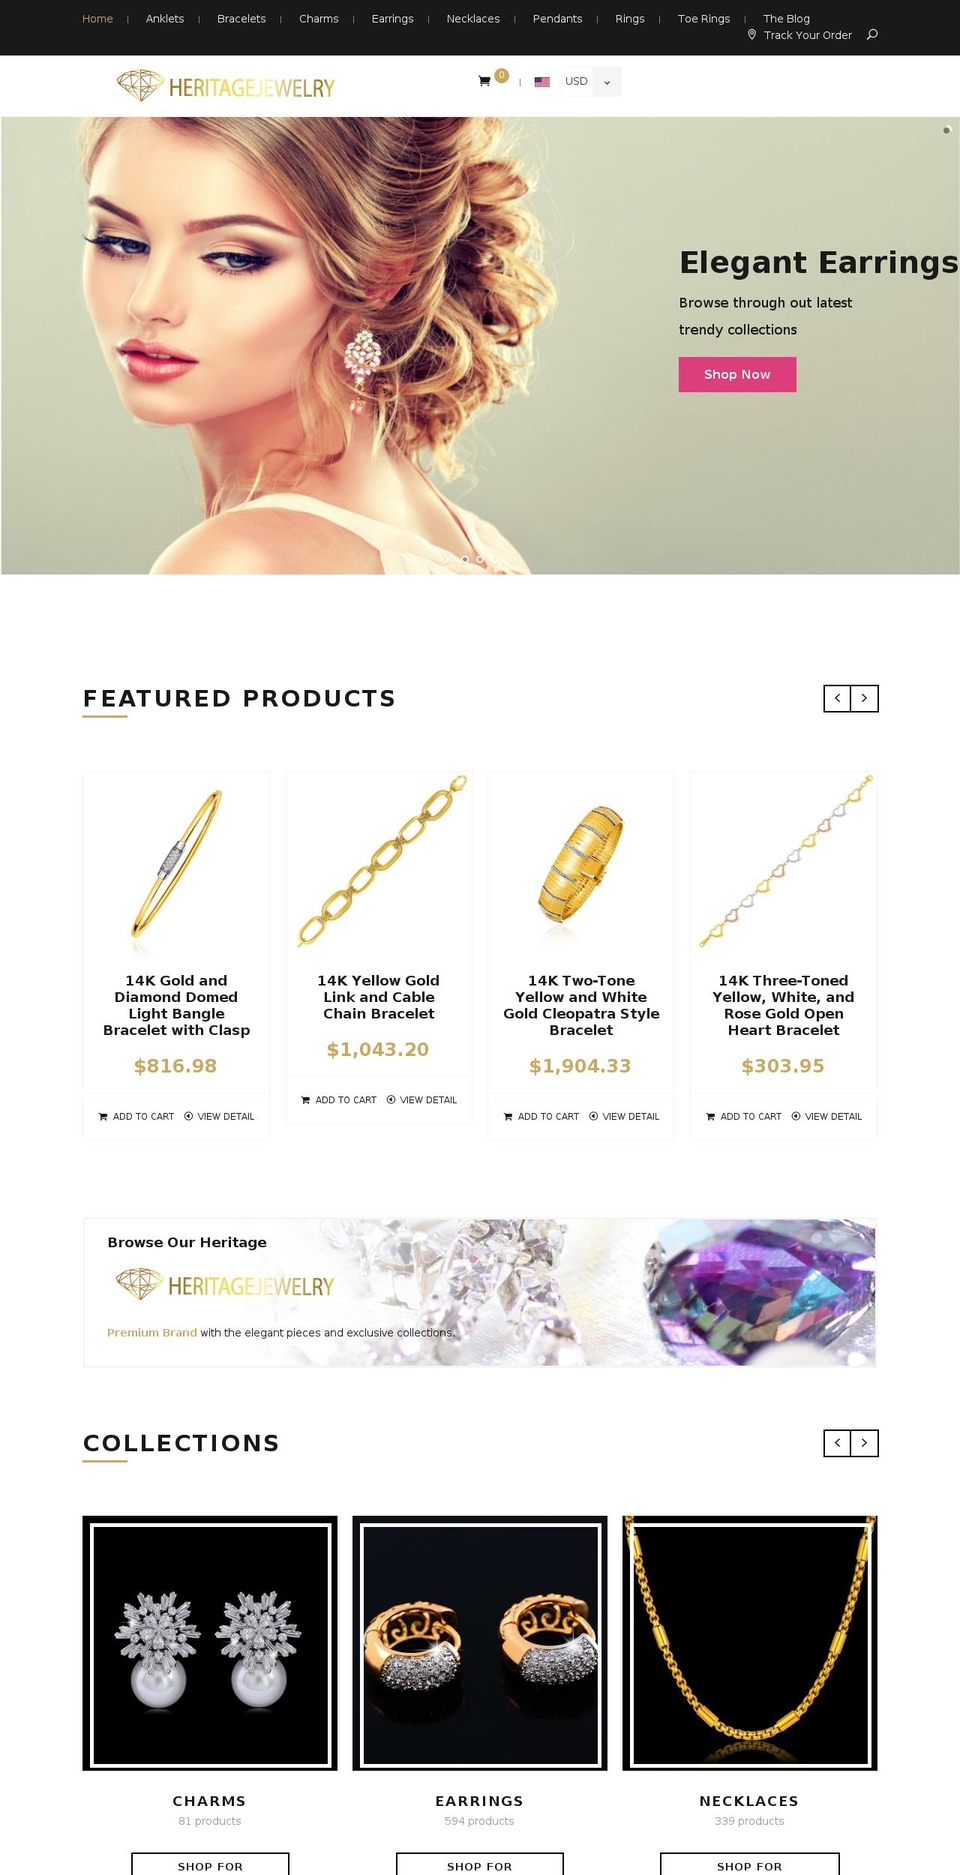 deshop Shopify theme site example heritagejewelry.net